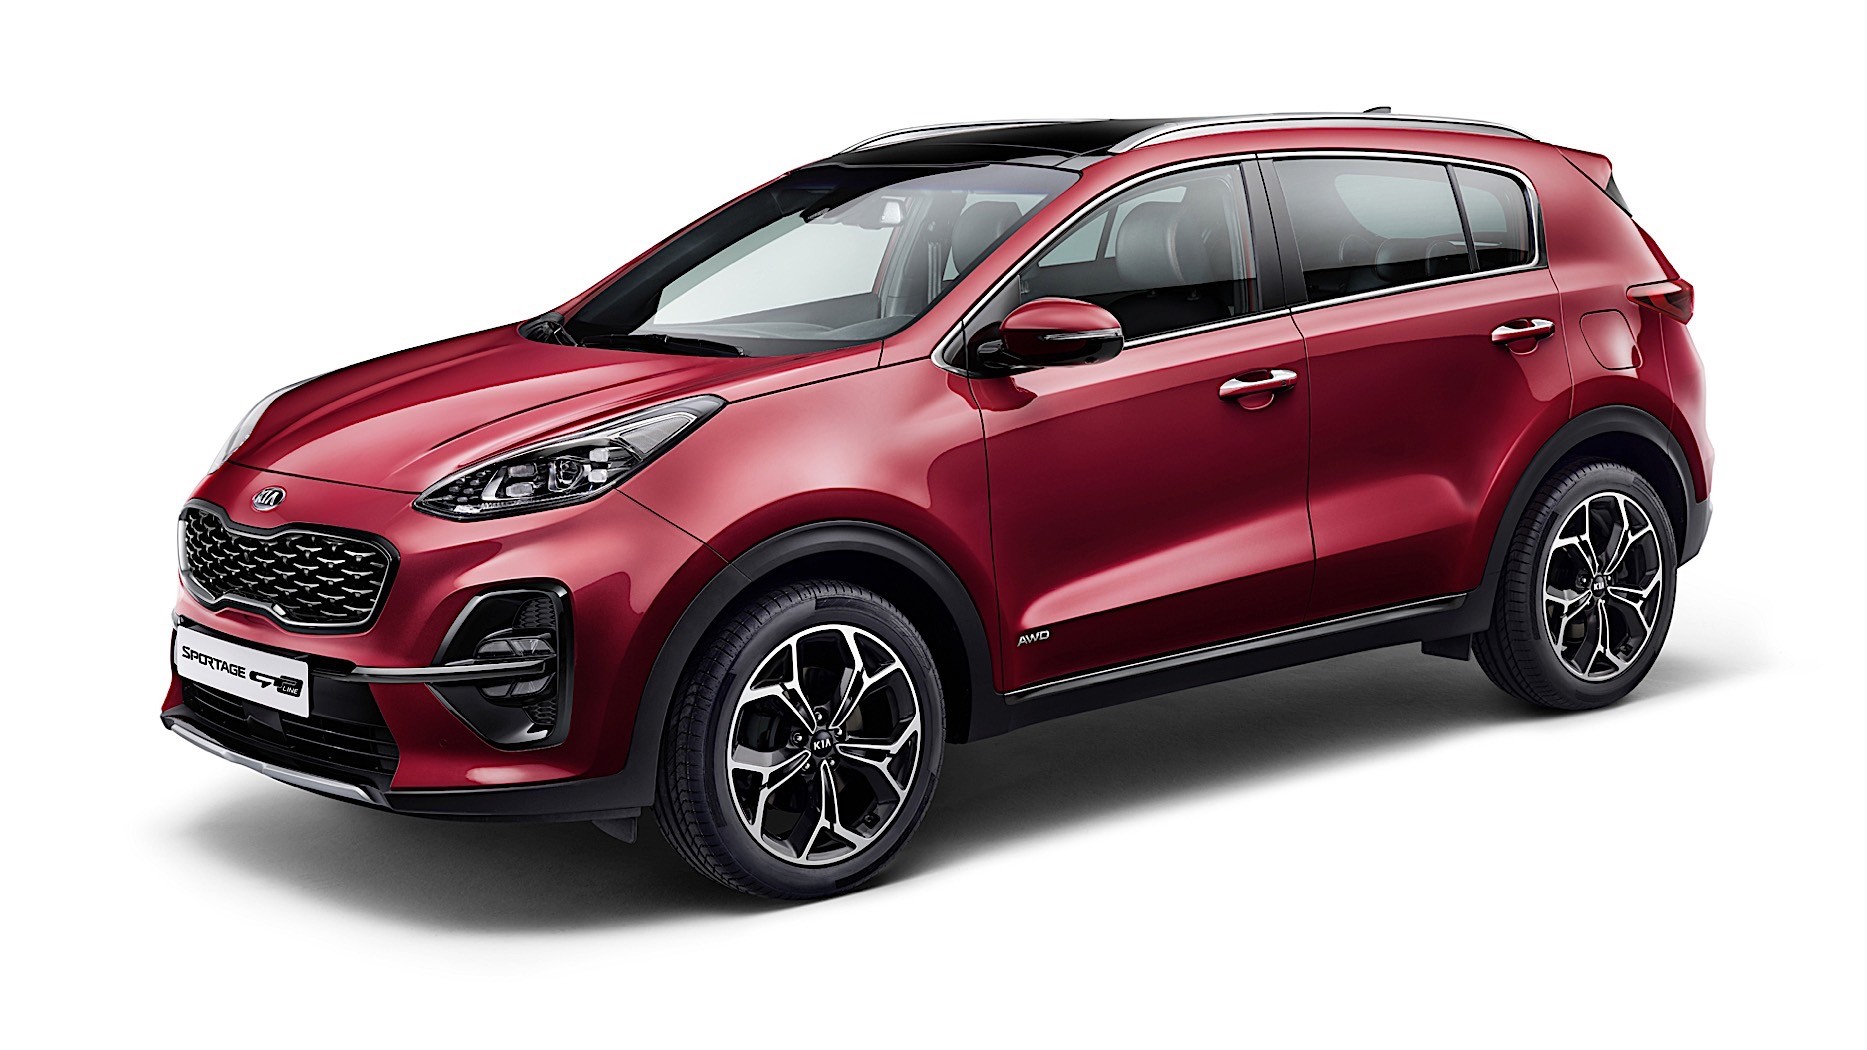 2022 Kia Sportage Gains New Tech and More Standard Features, Starts ...